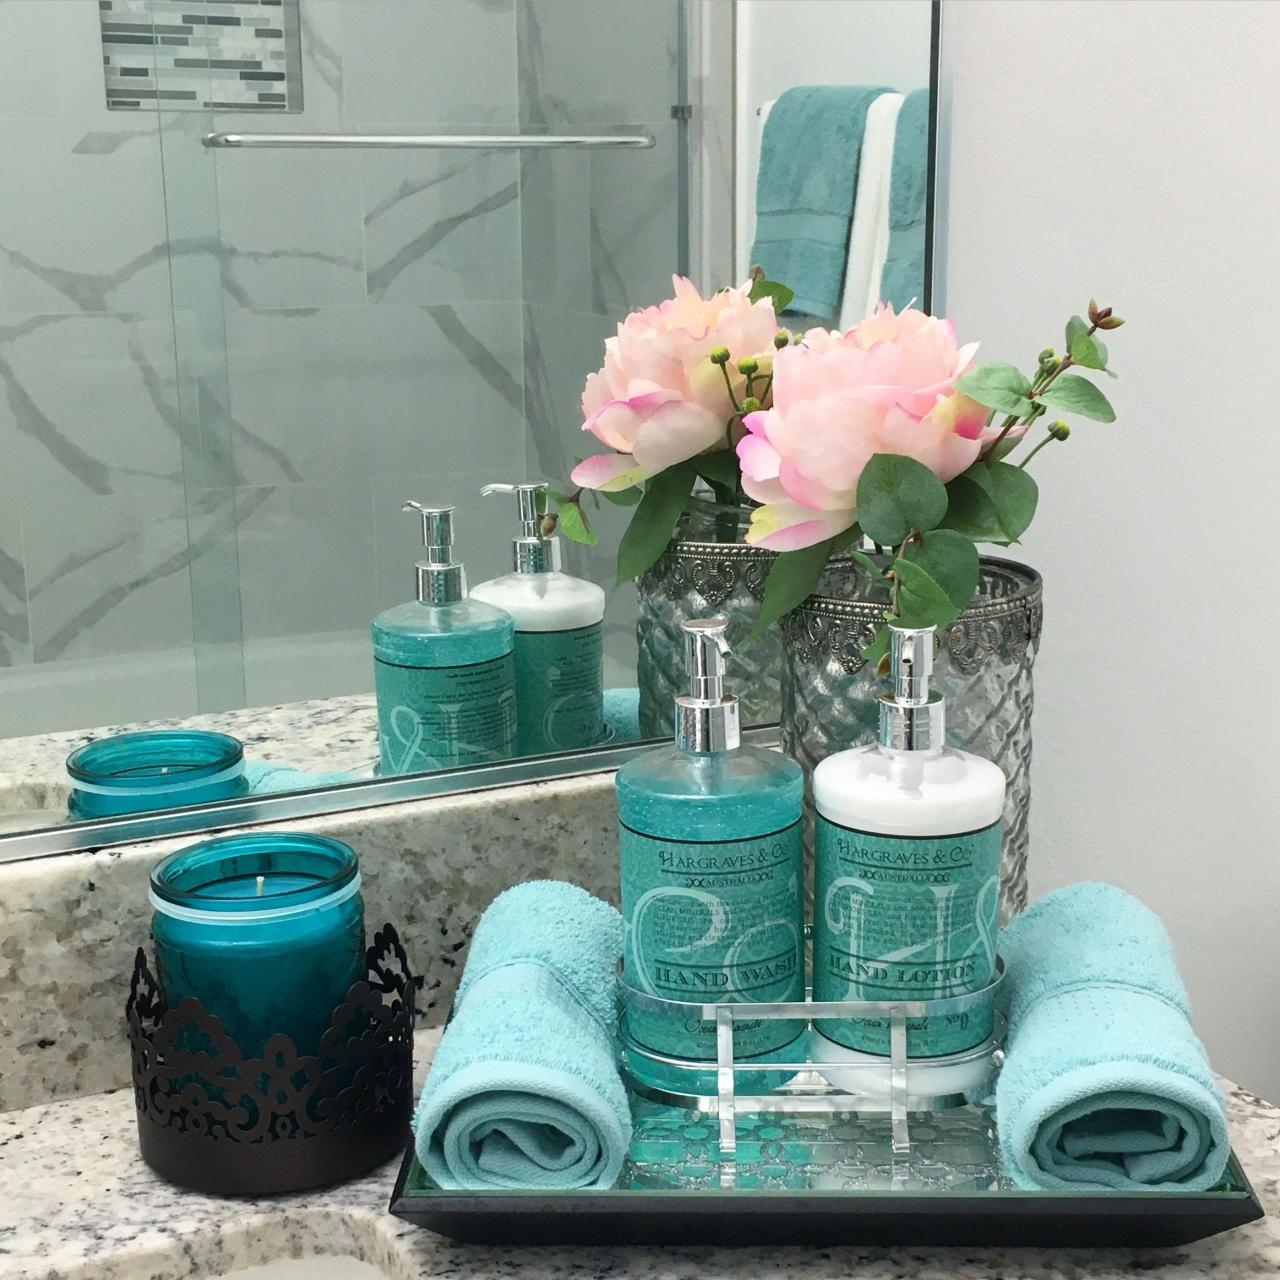 Talented conferred bathroom organization More hints in 2020 Teal